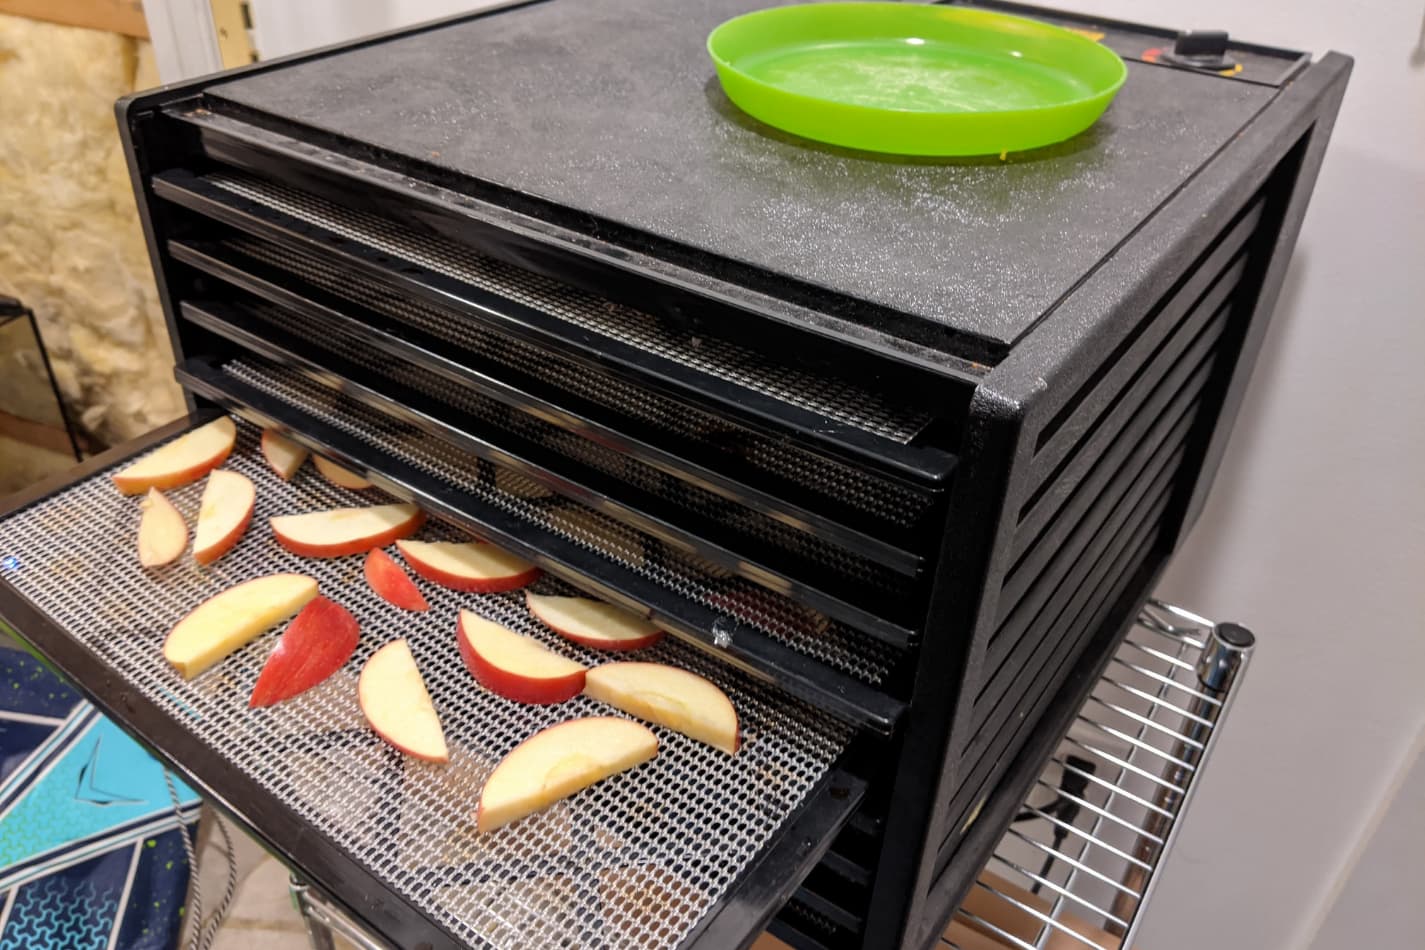 An image of our Excalibur dehydrator running apples.